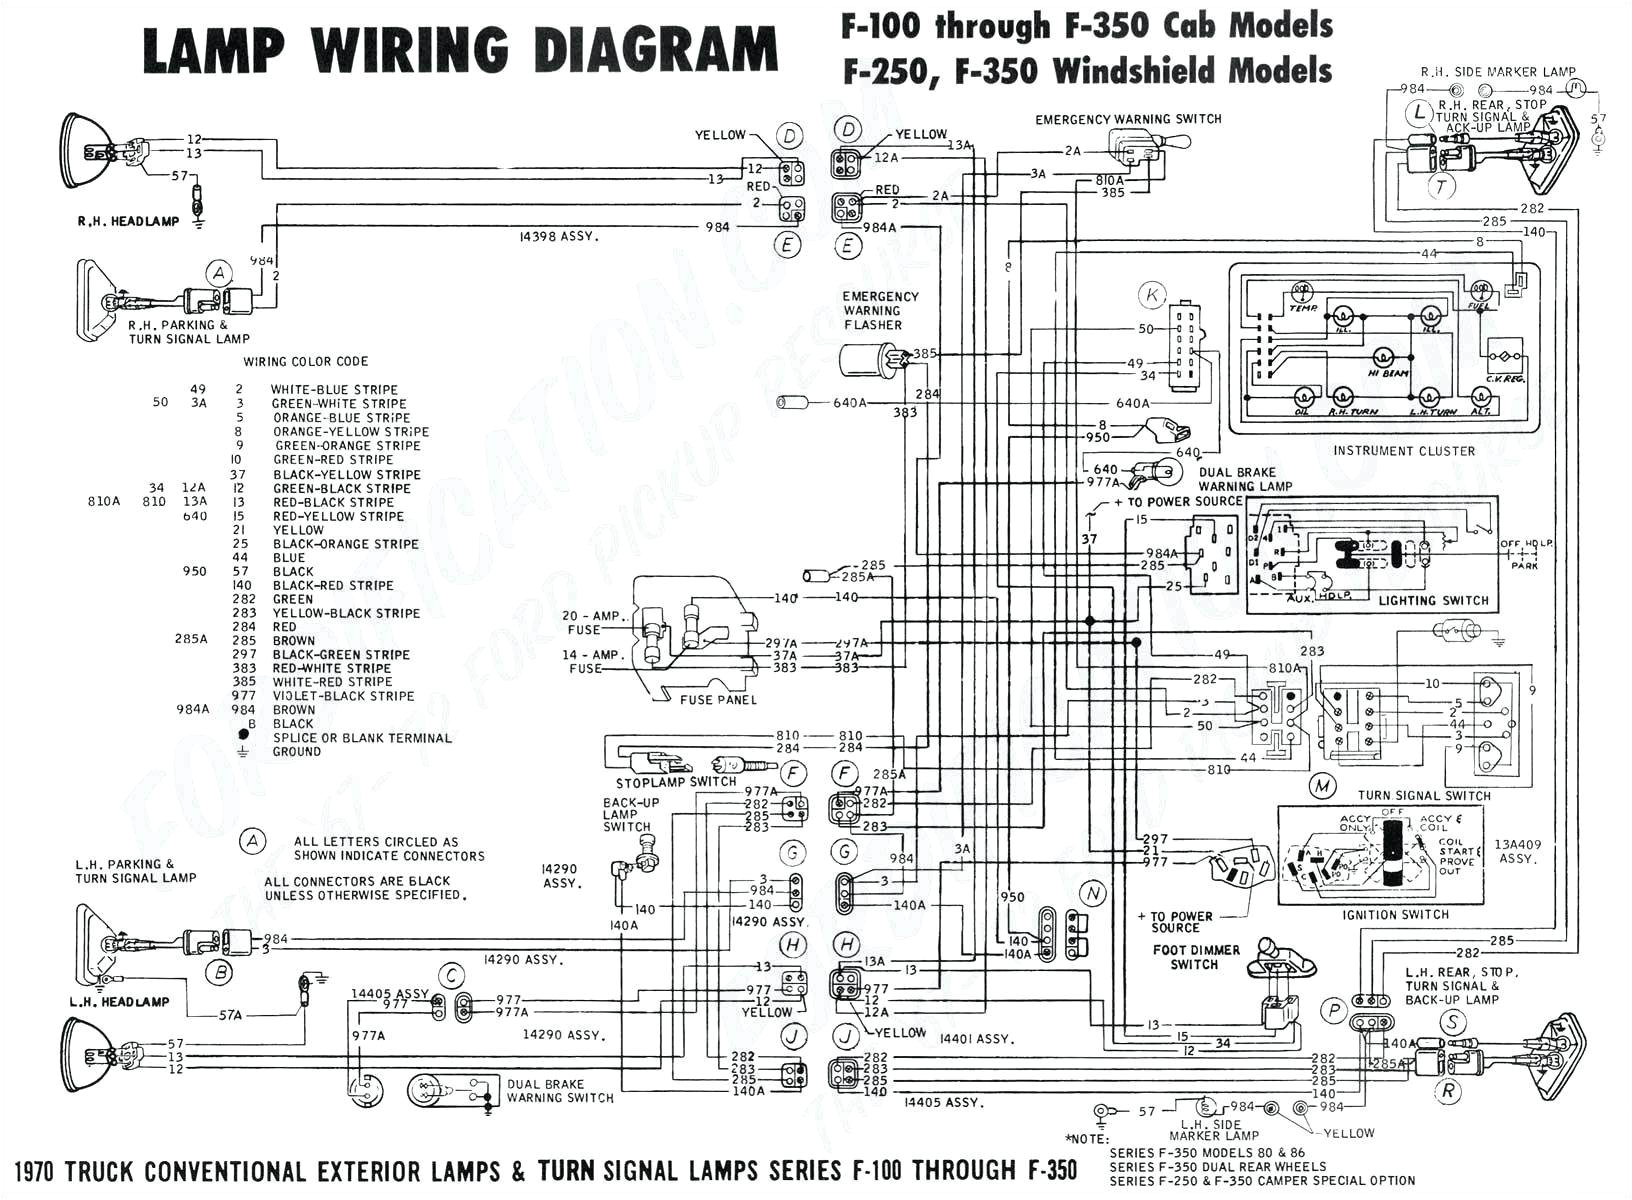 Schematic Diagram Of Electrical Wiring 1961 1962 Diagram Electrical Wiring Davies Corvette Parts Wiring